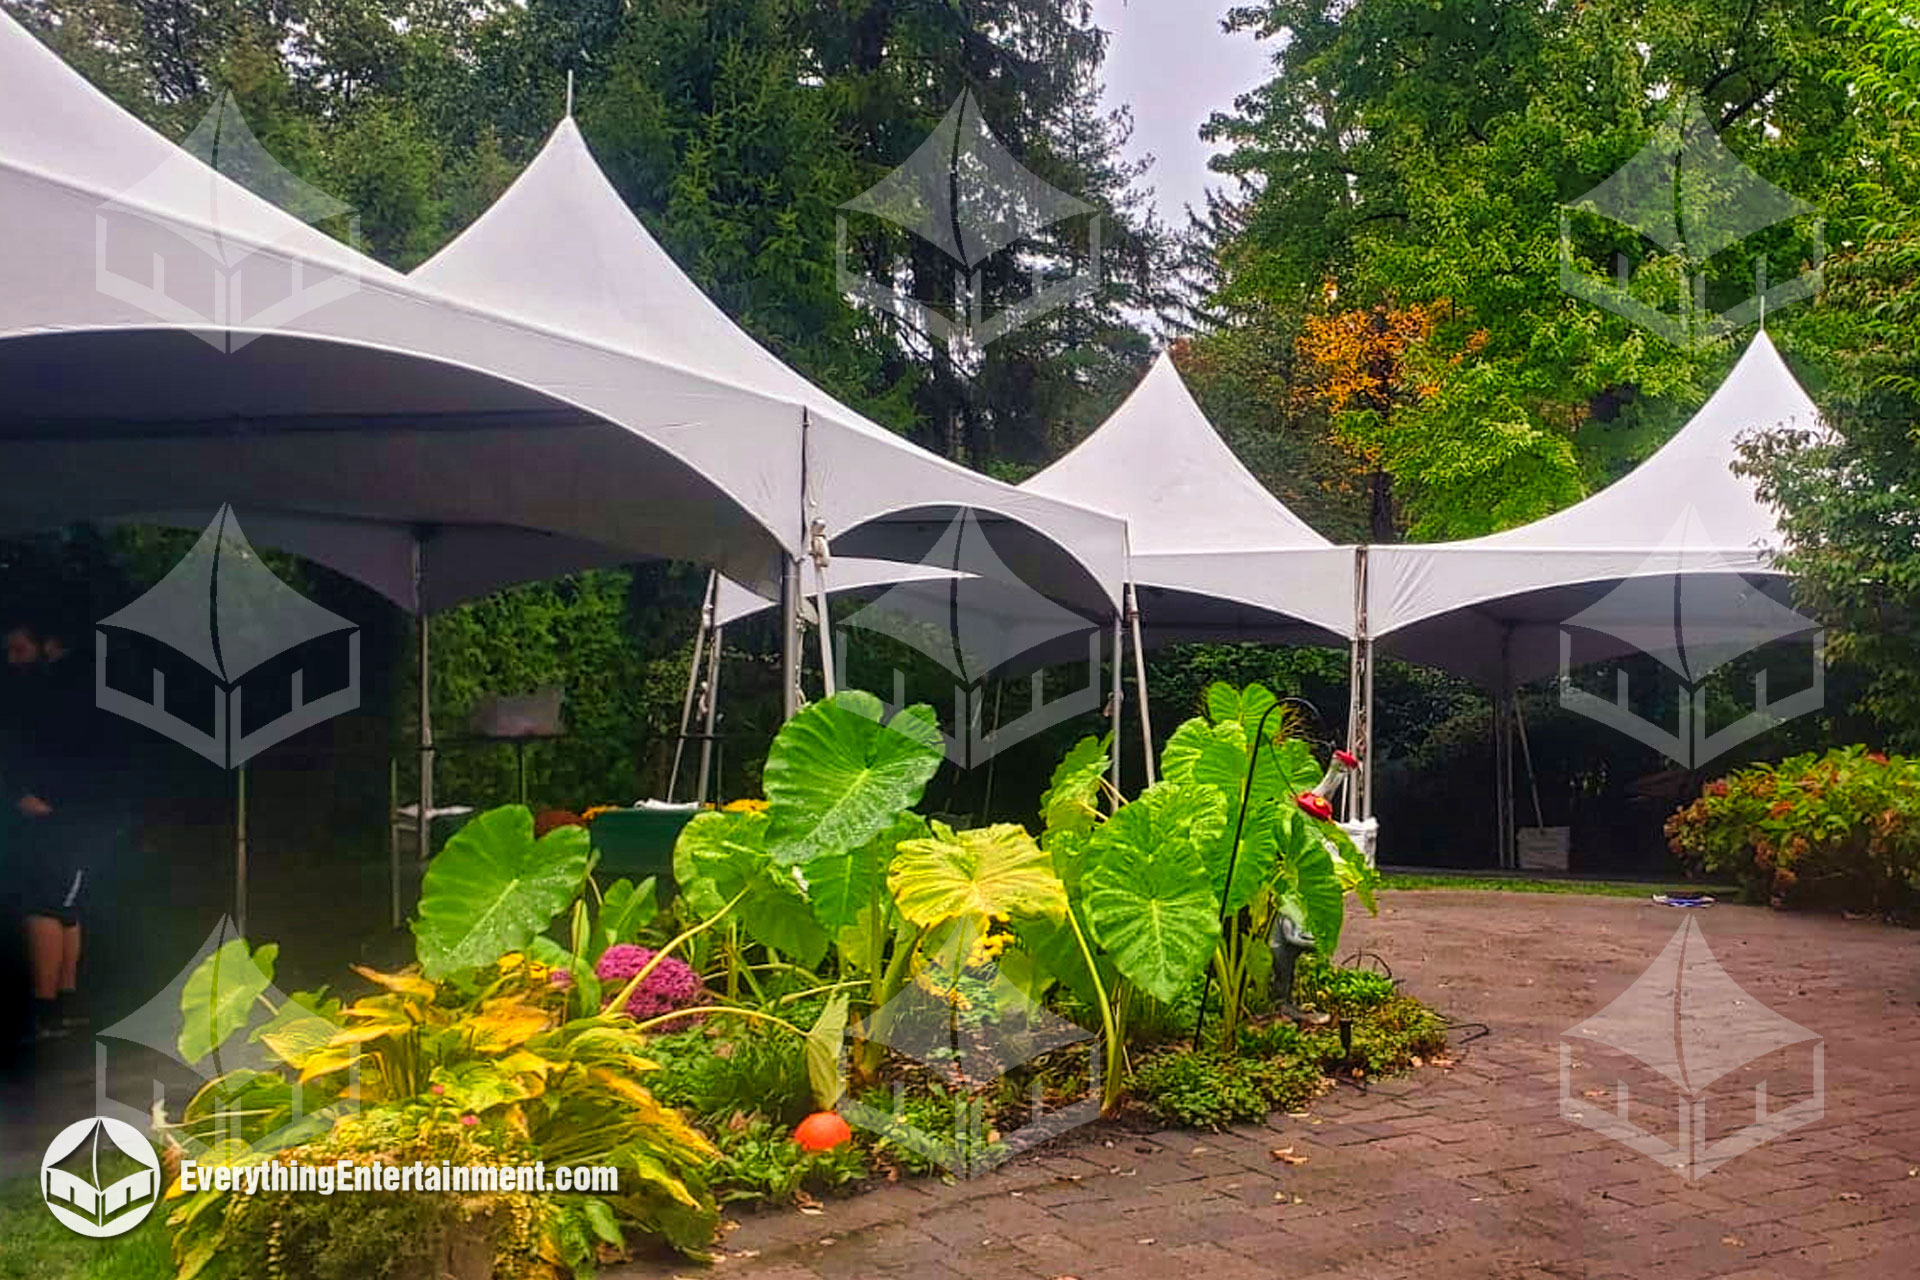 Several high-peak marquee tents next to each other set up in a backyard.